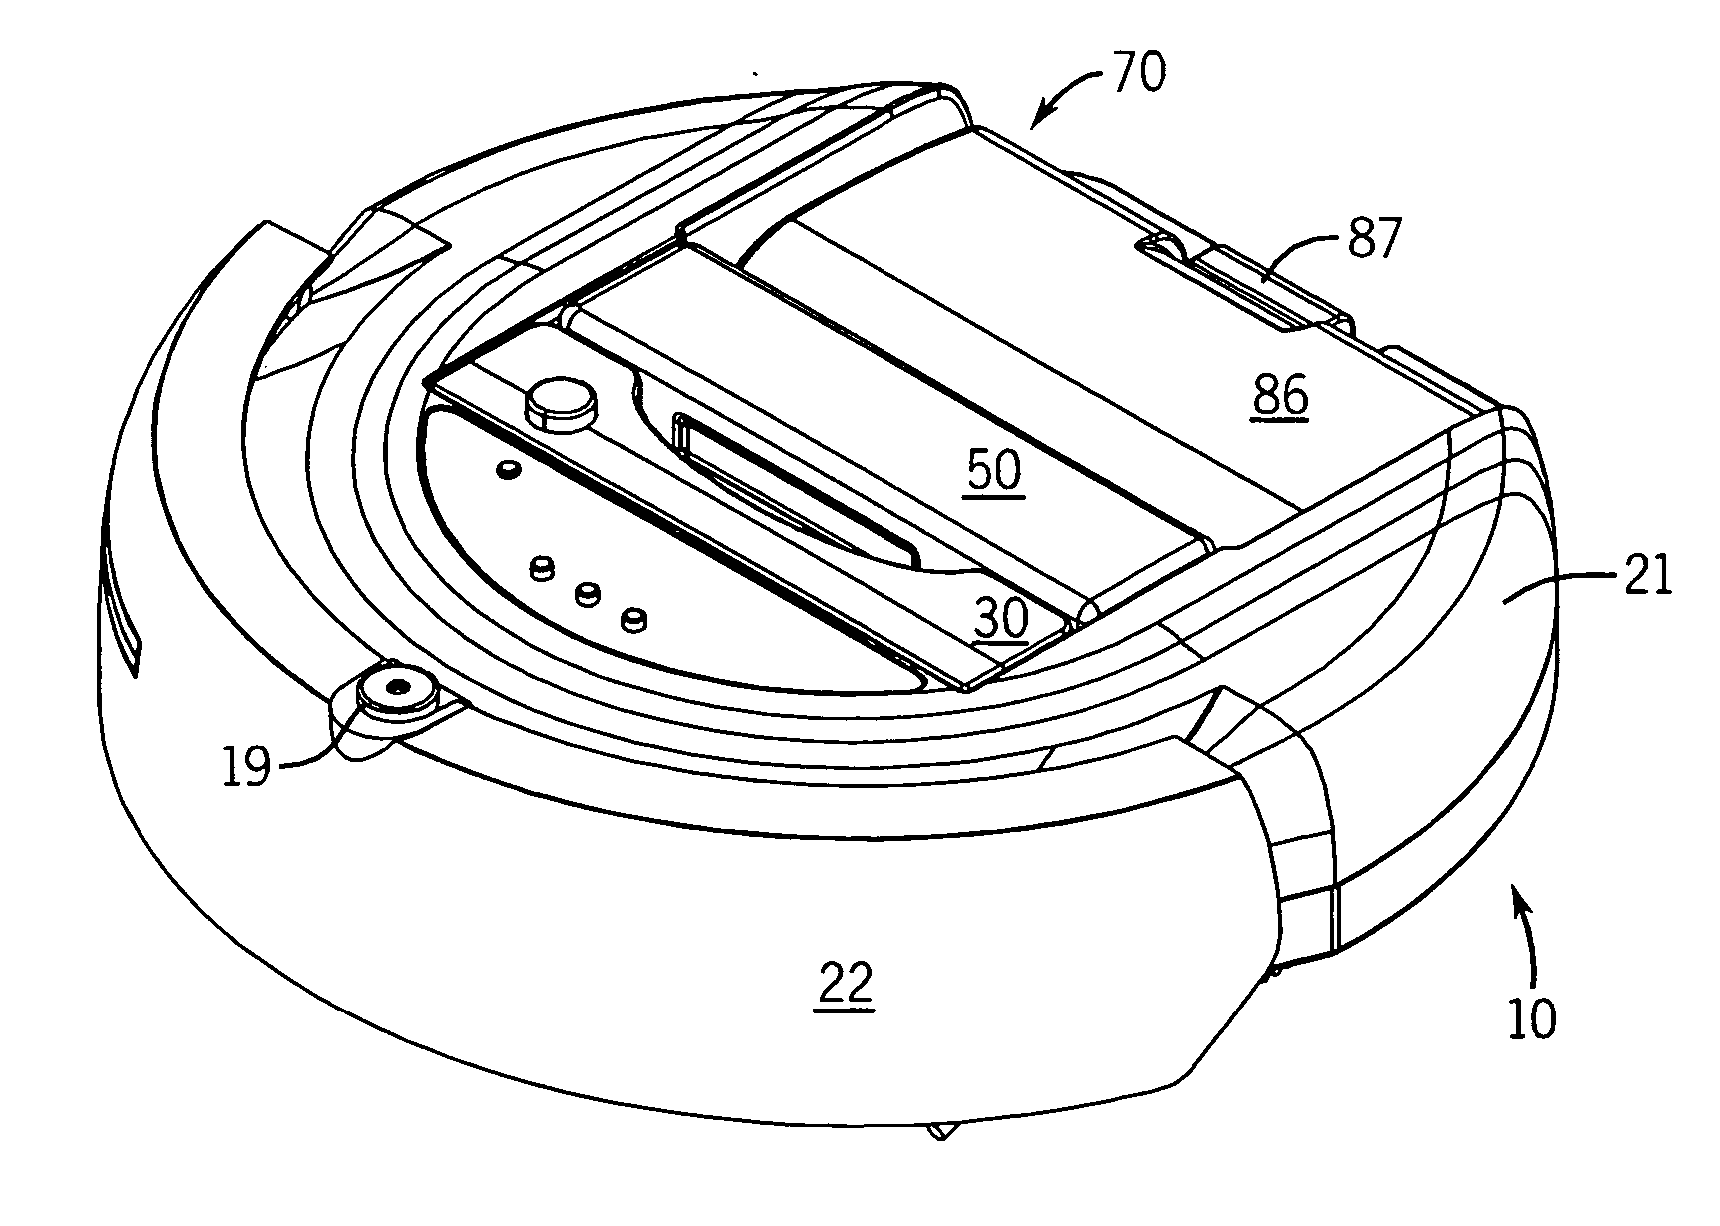 Surface treating device with top load cartridge-based cleaning systsem